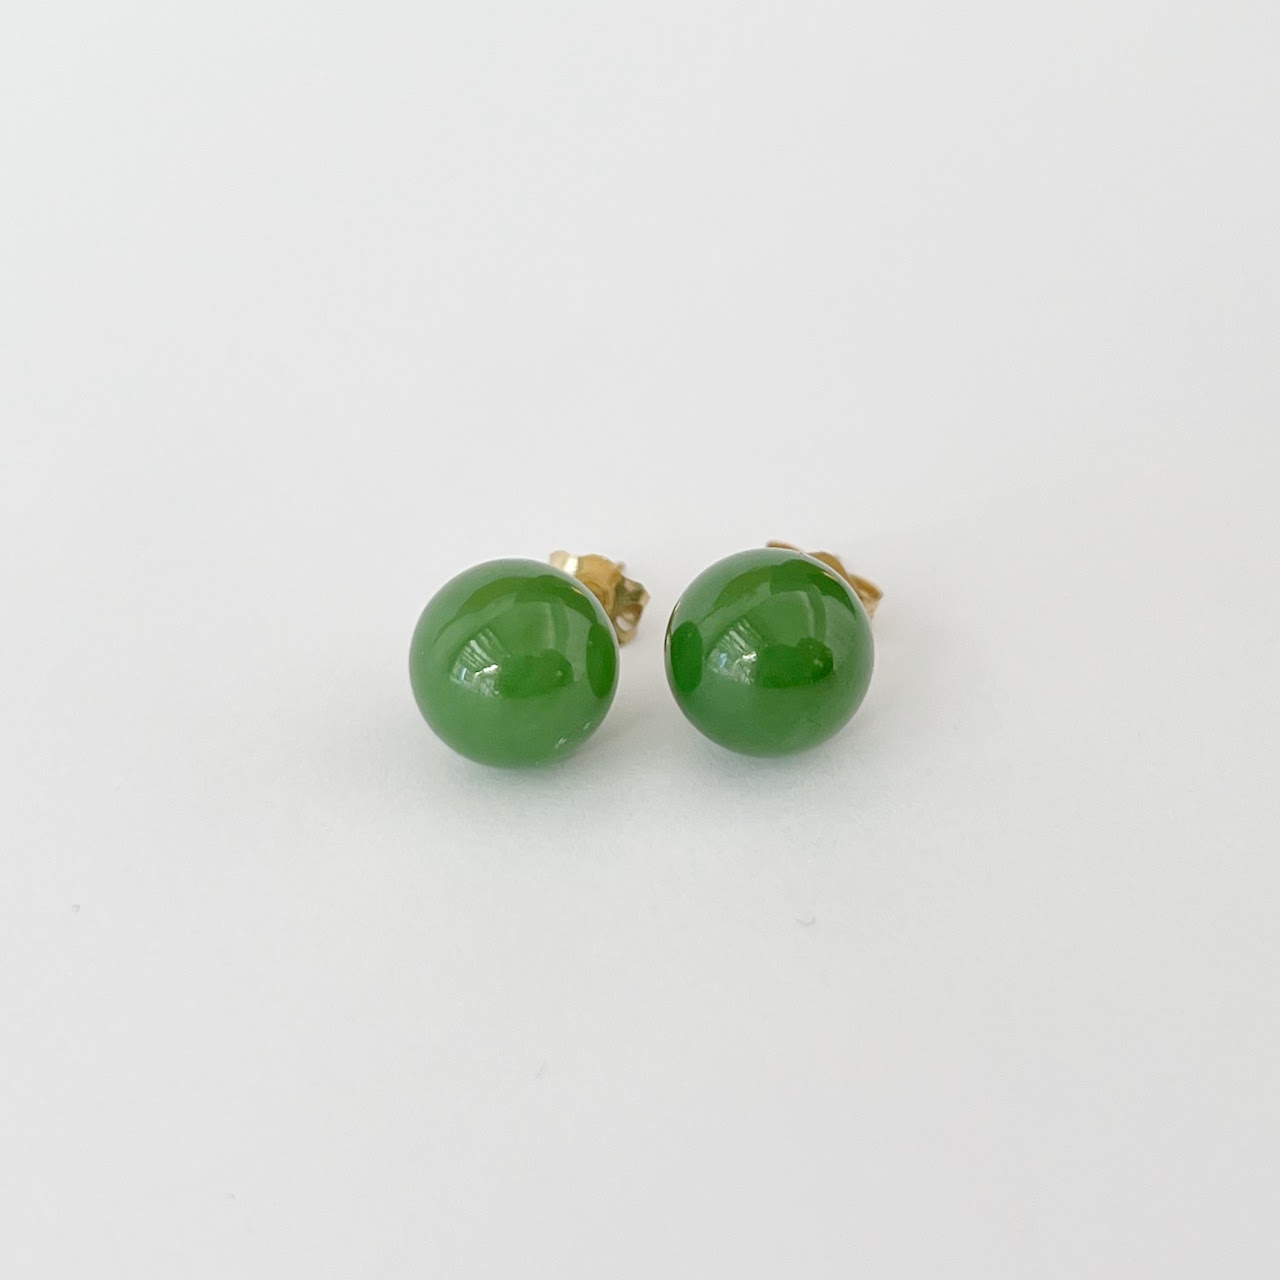 14K Gold and Green Stone Earrings